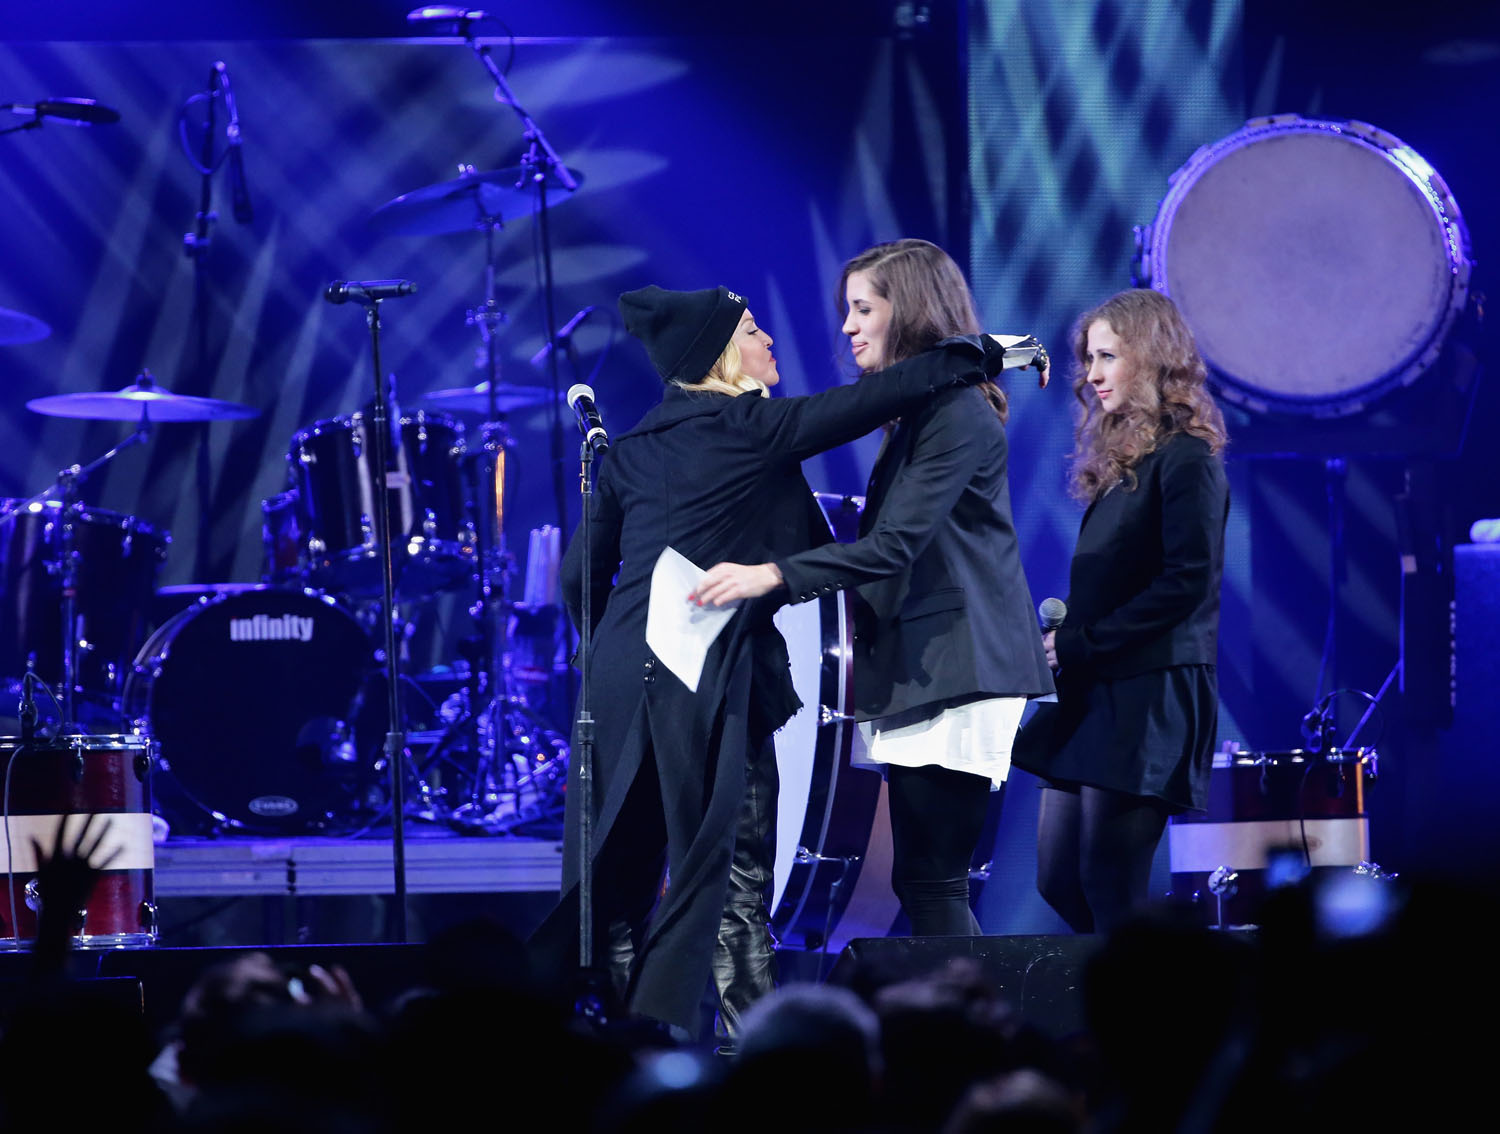 Madonna introduces Nadezhda Tolokonnikova, and Maria Alyokhina, formerly of Pussy Riot, onstage at the Amnesty International Concert presented by the CBGB Festival at Barclays Center on February 5, 2014 in New York City.